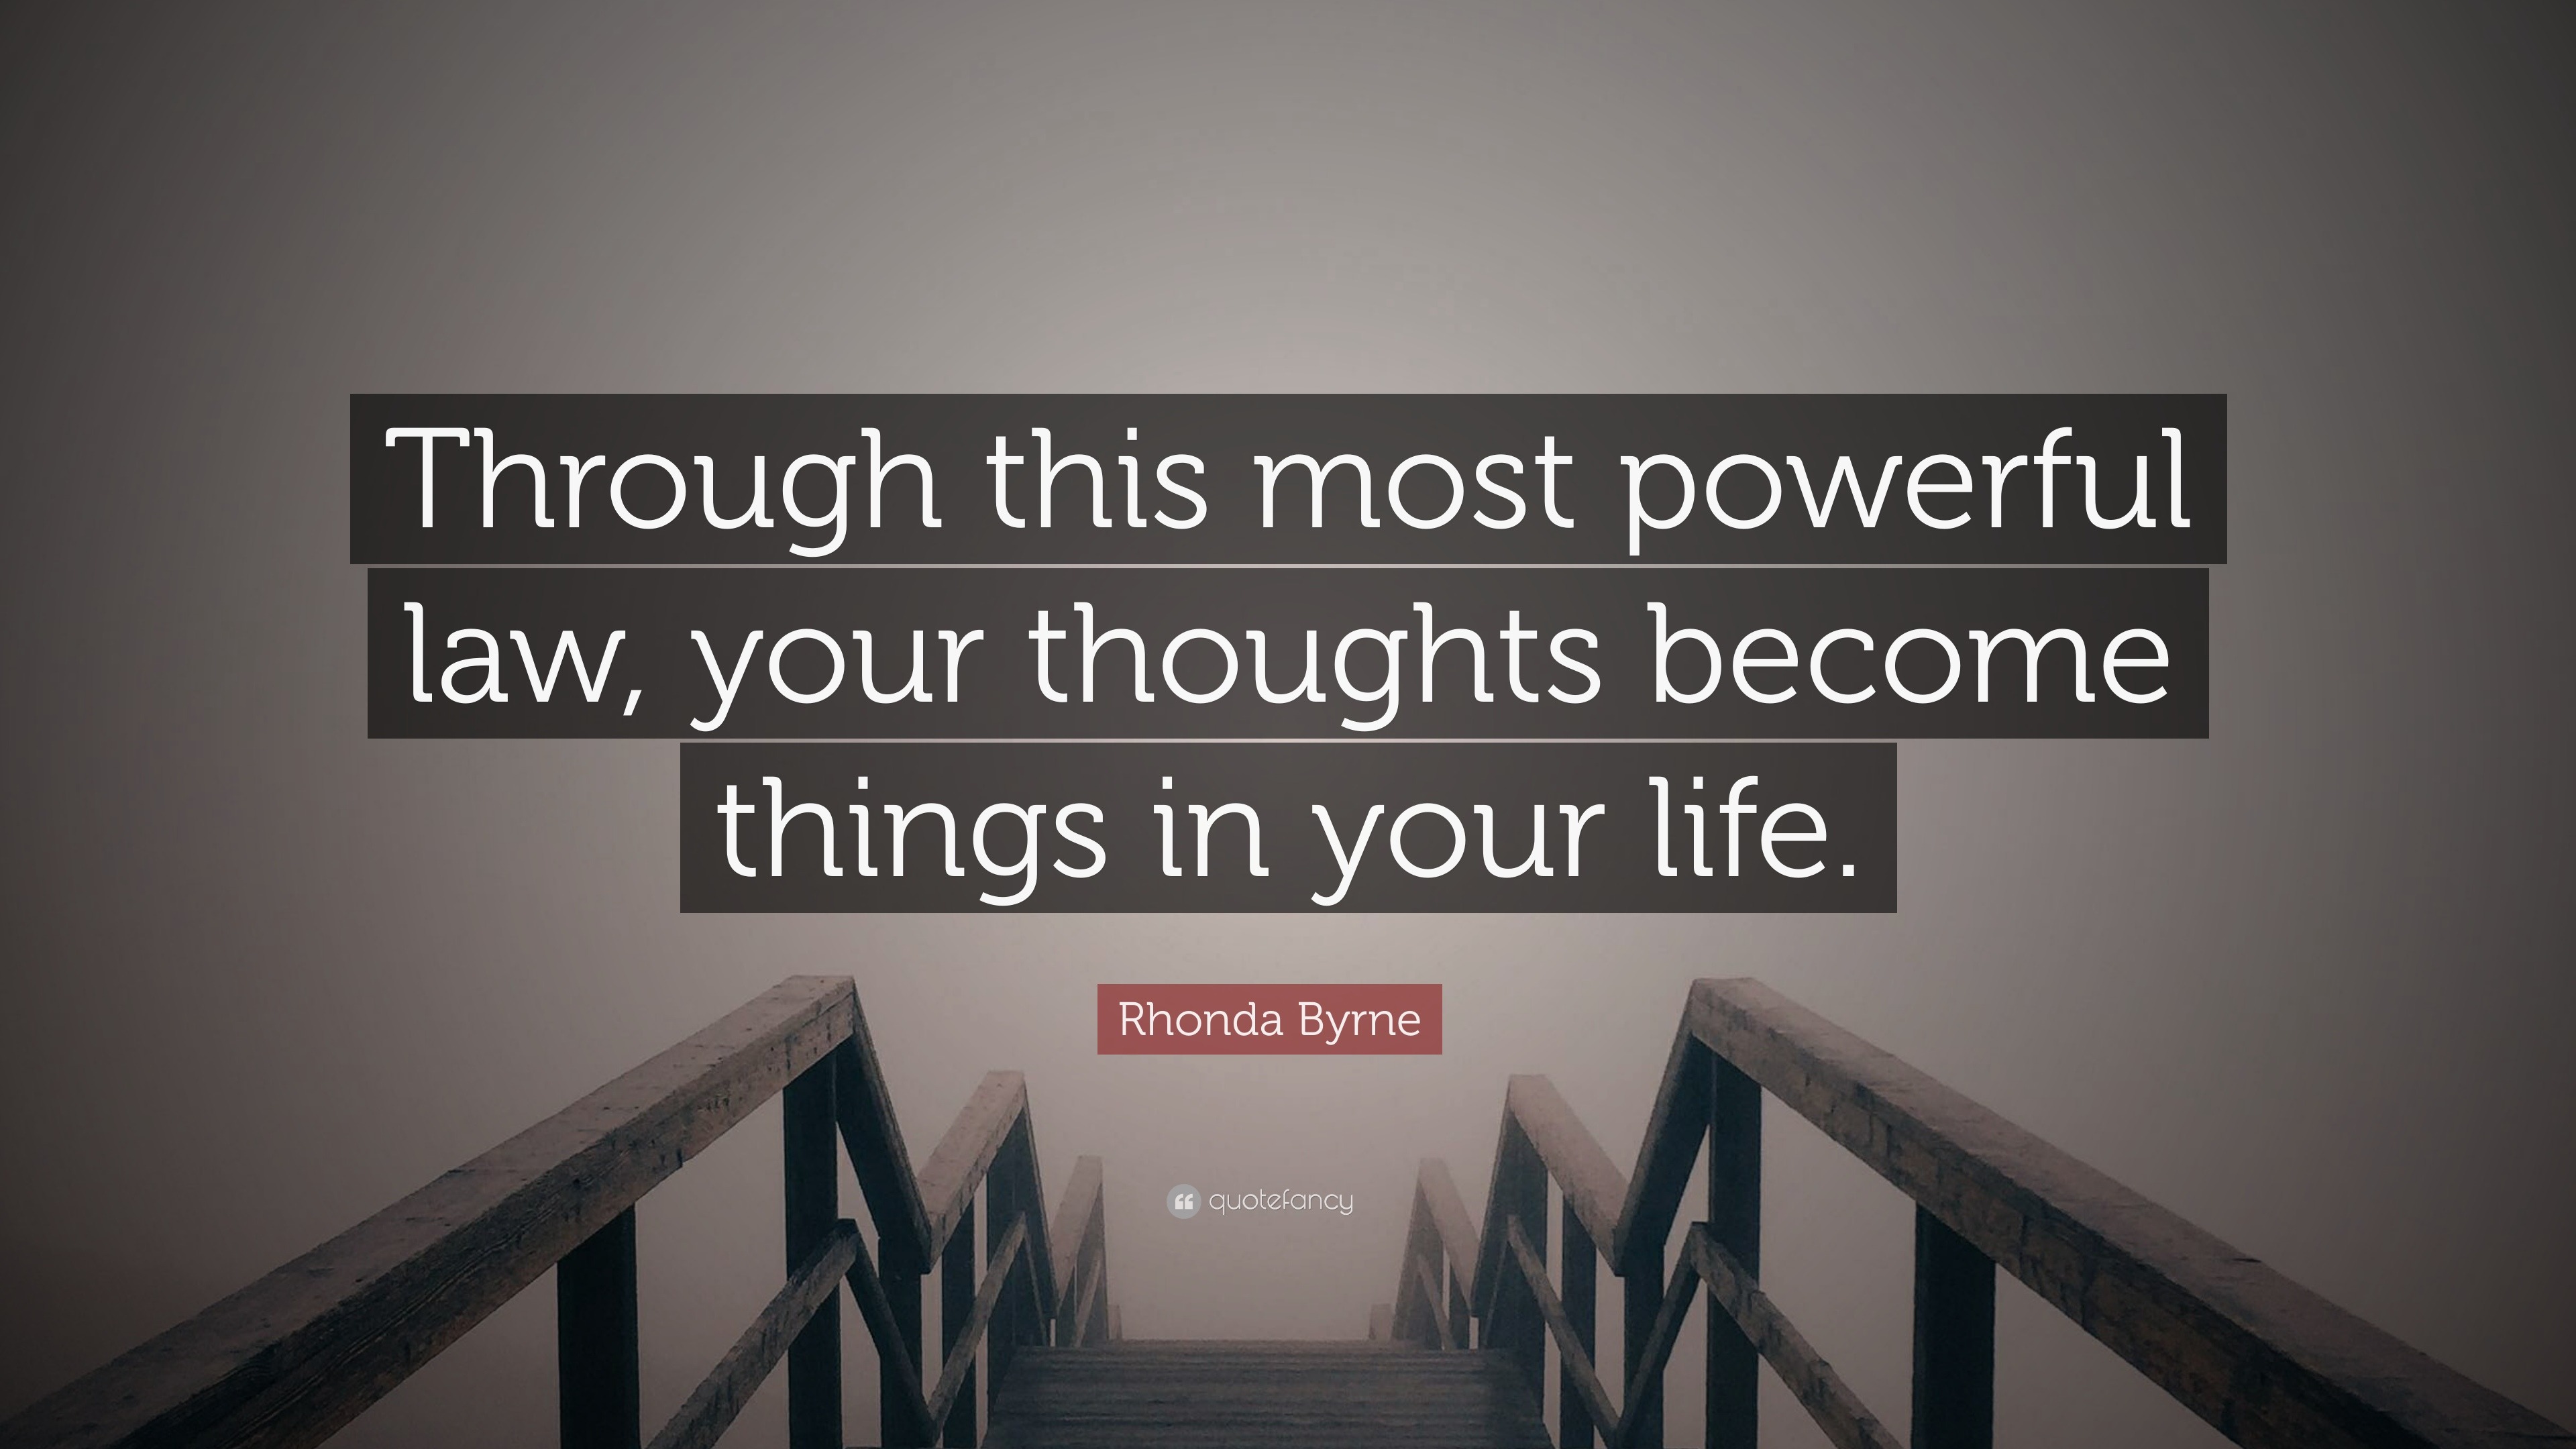 Rhonda Byrne Quote: "Through this most powerful law, your ...